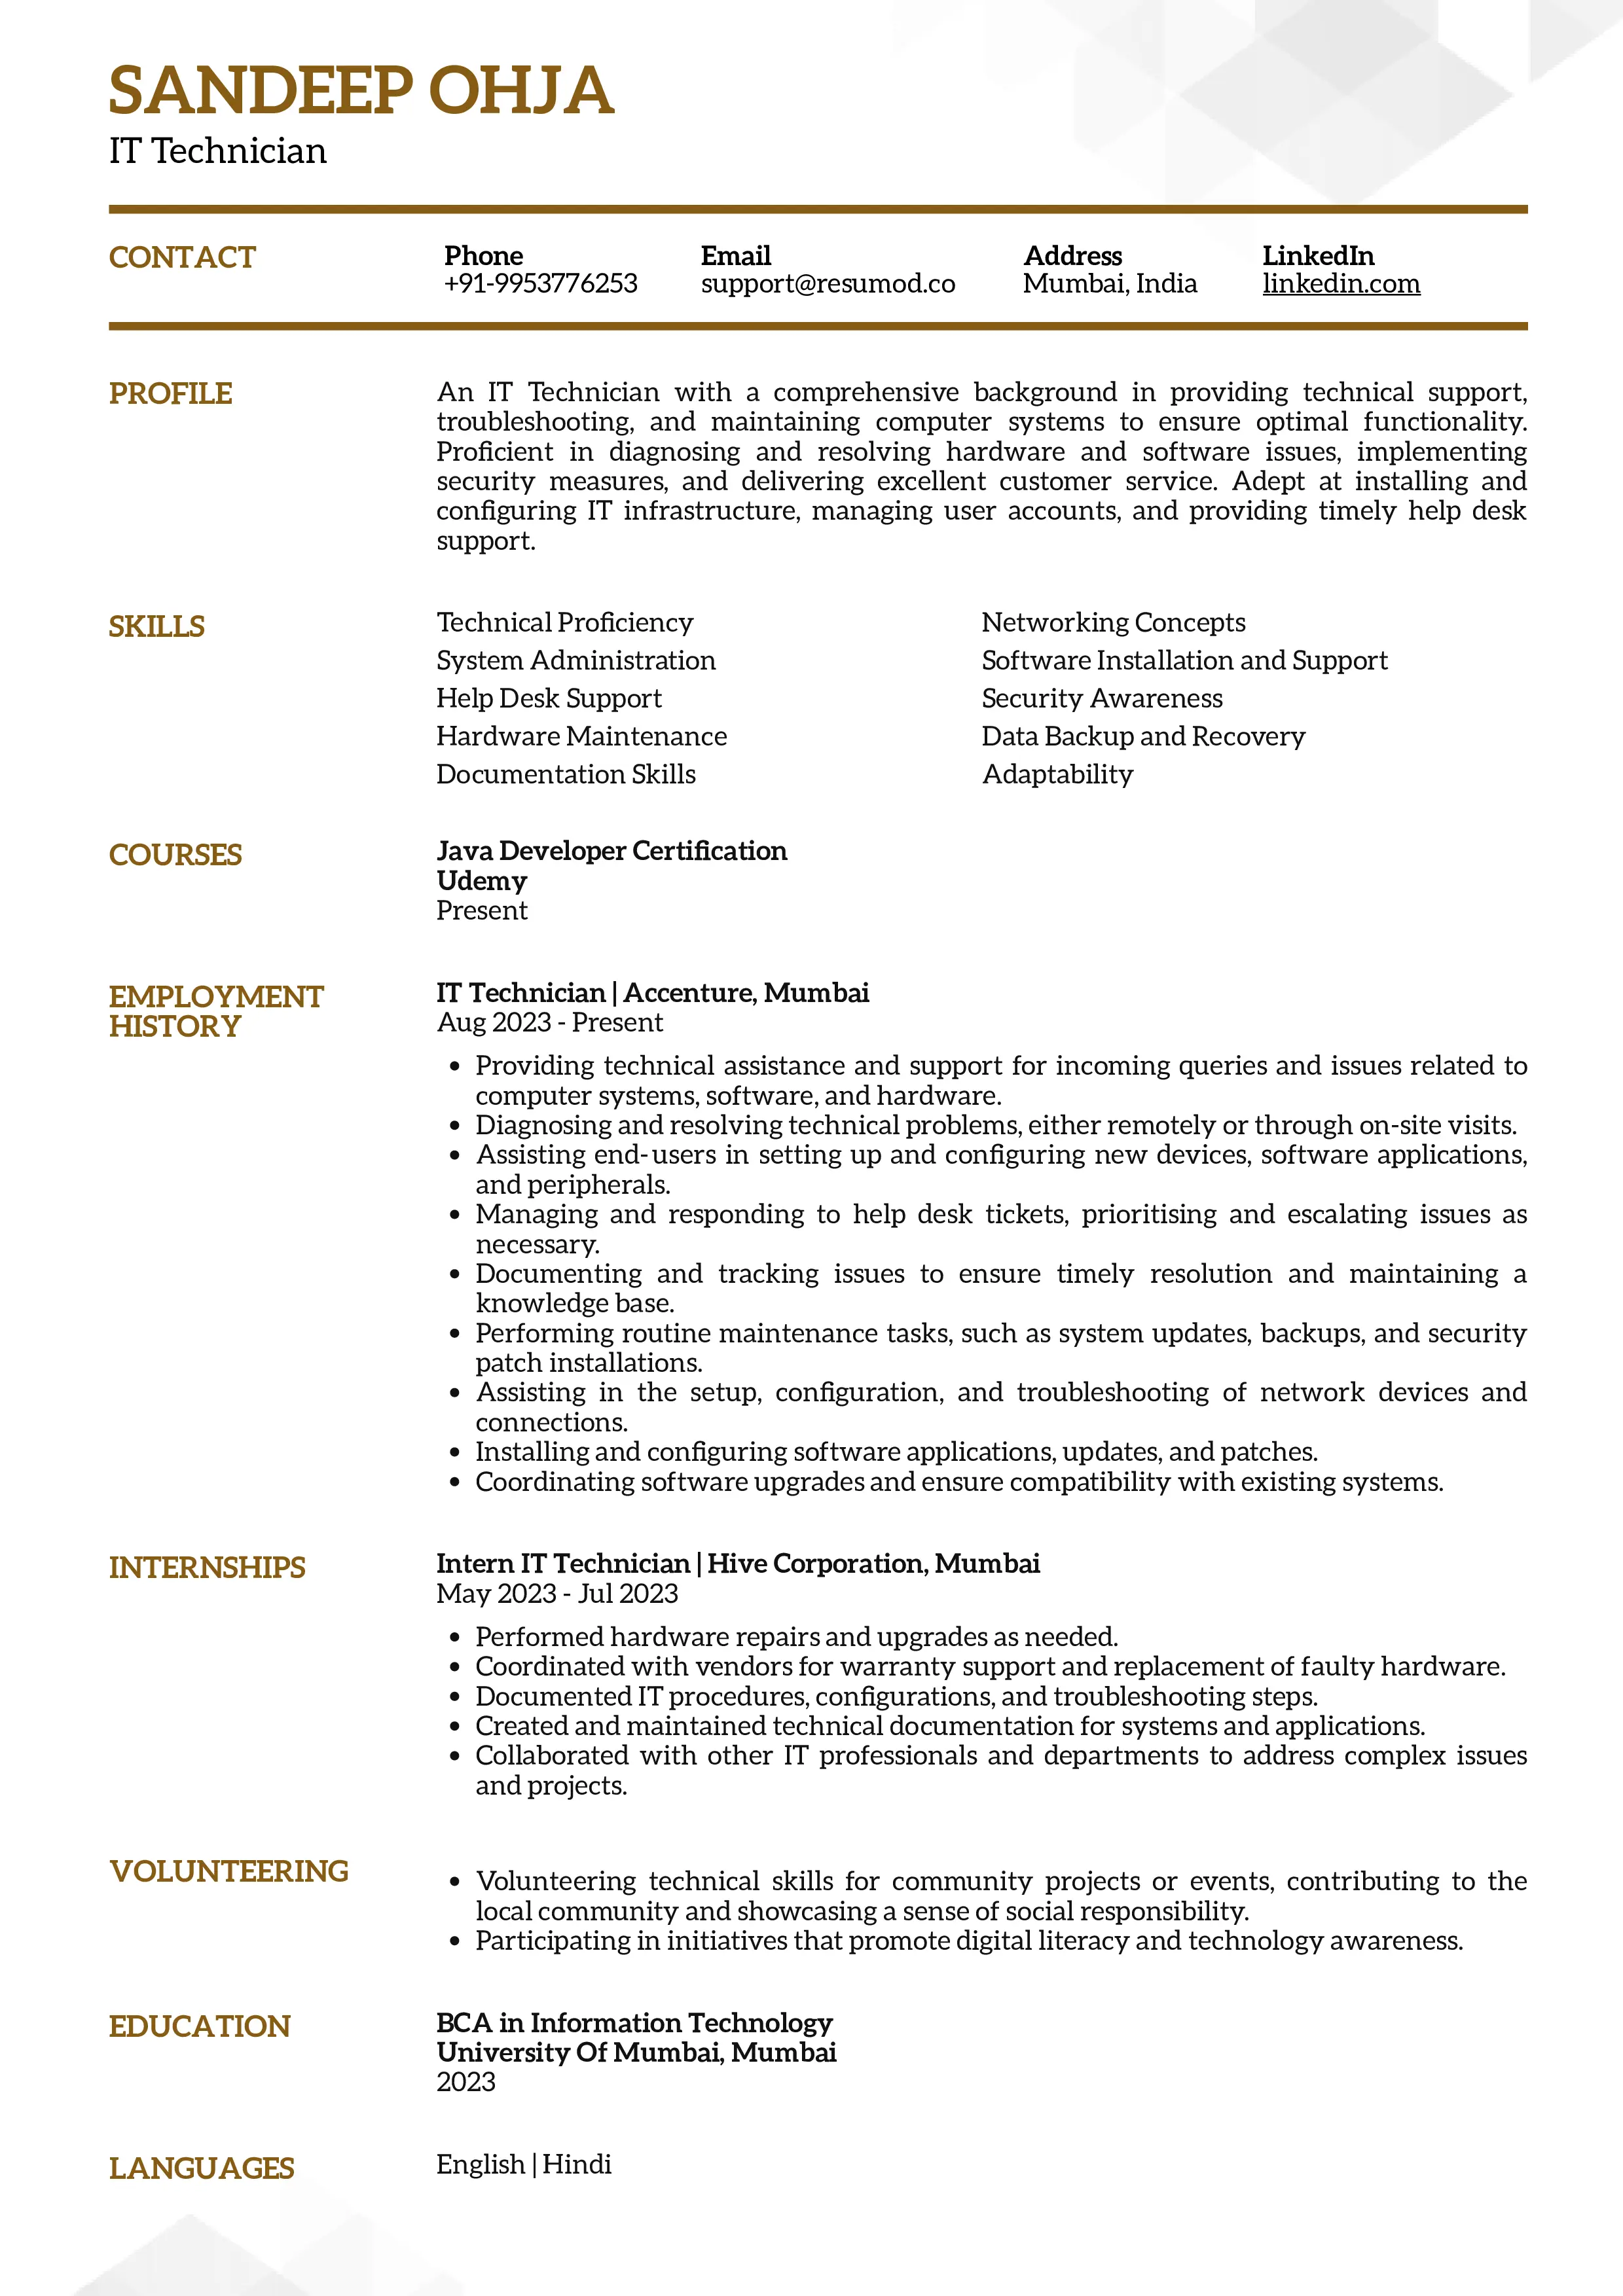 Sample Resume of IT Technician | Free Resume Templates & Samples on Resumod.co